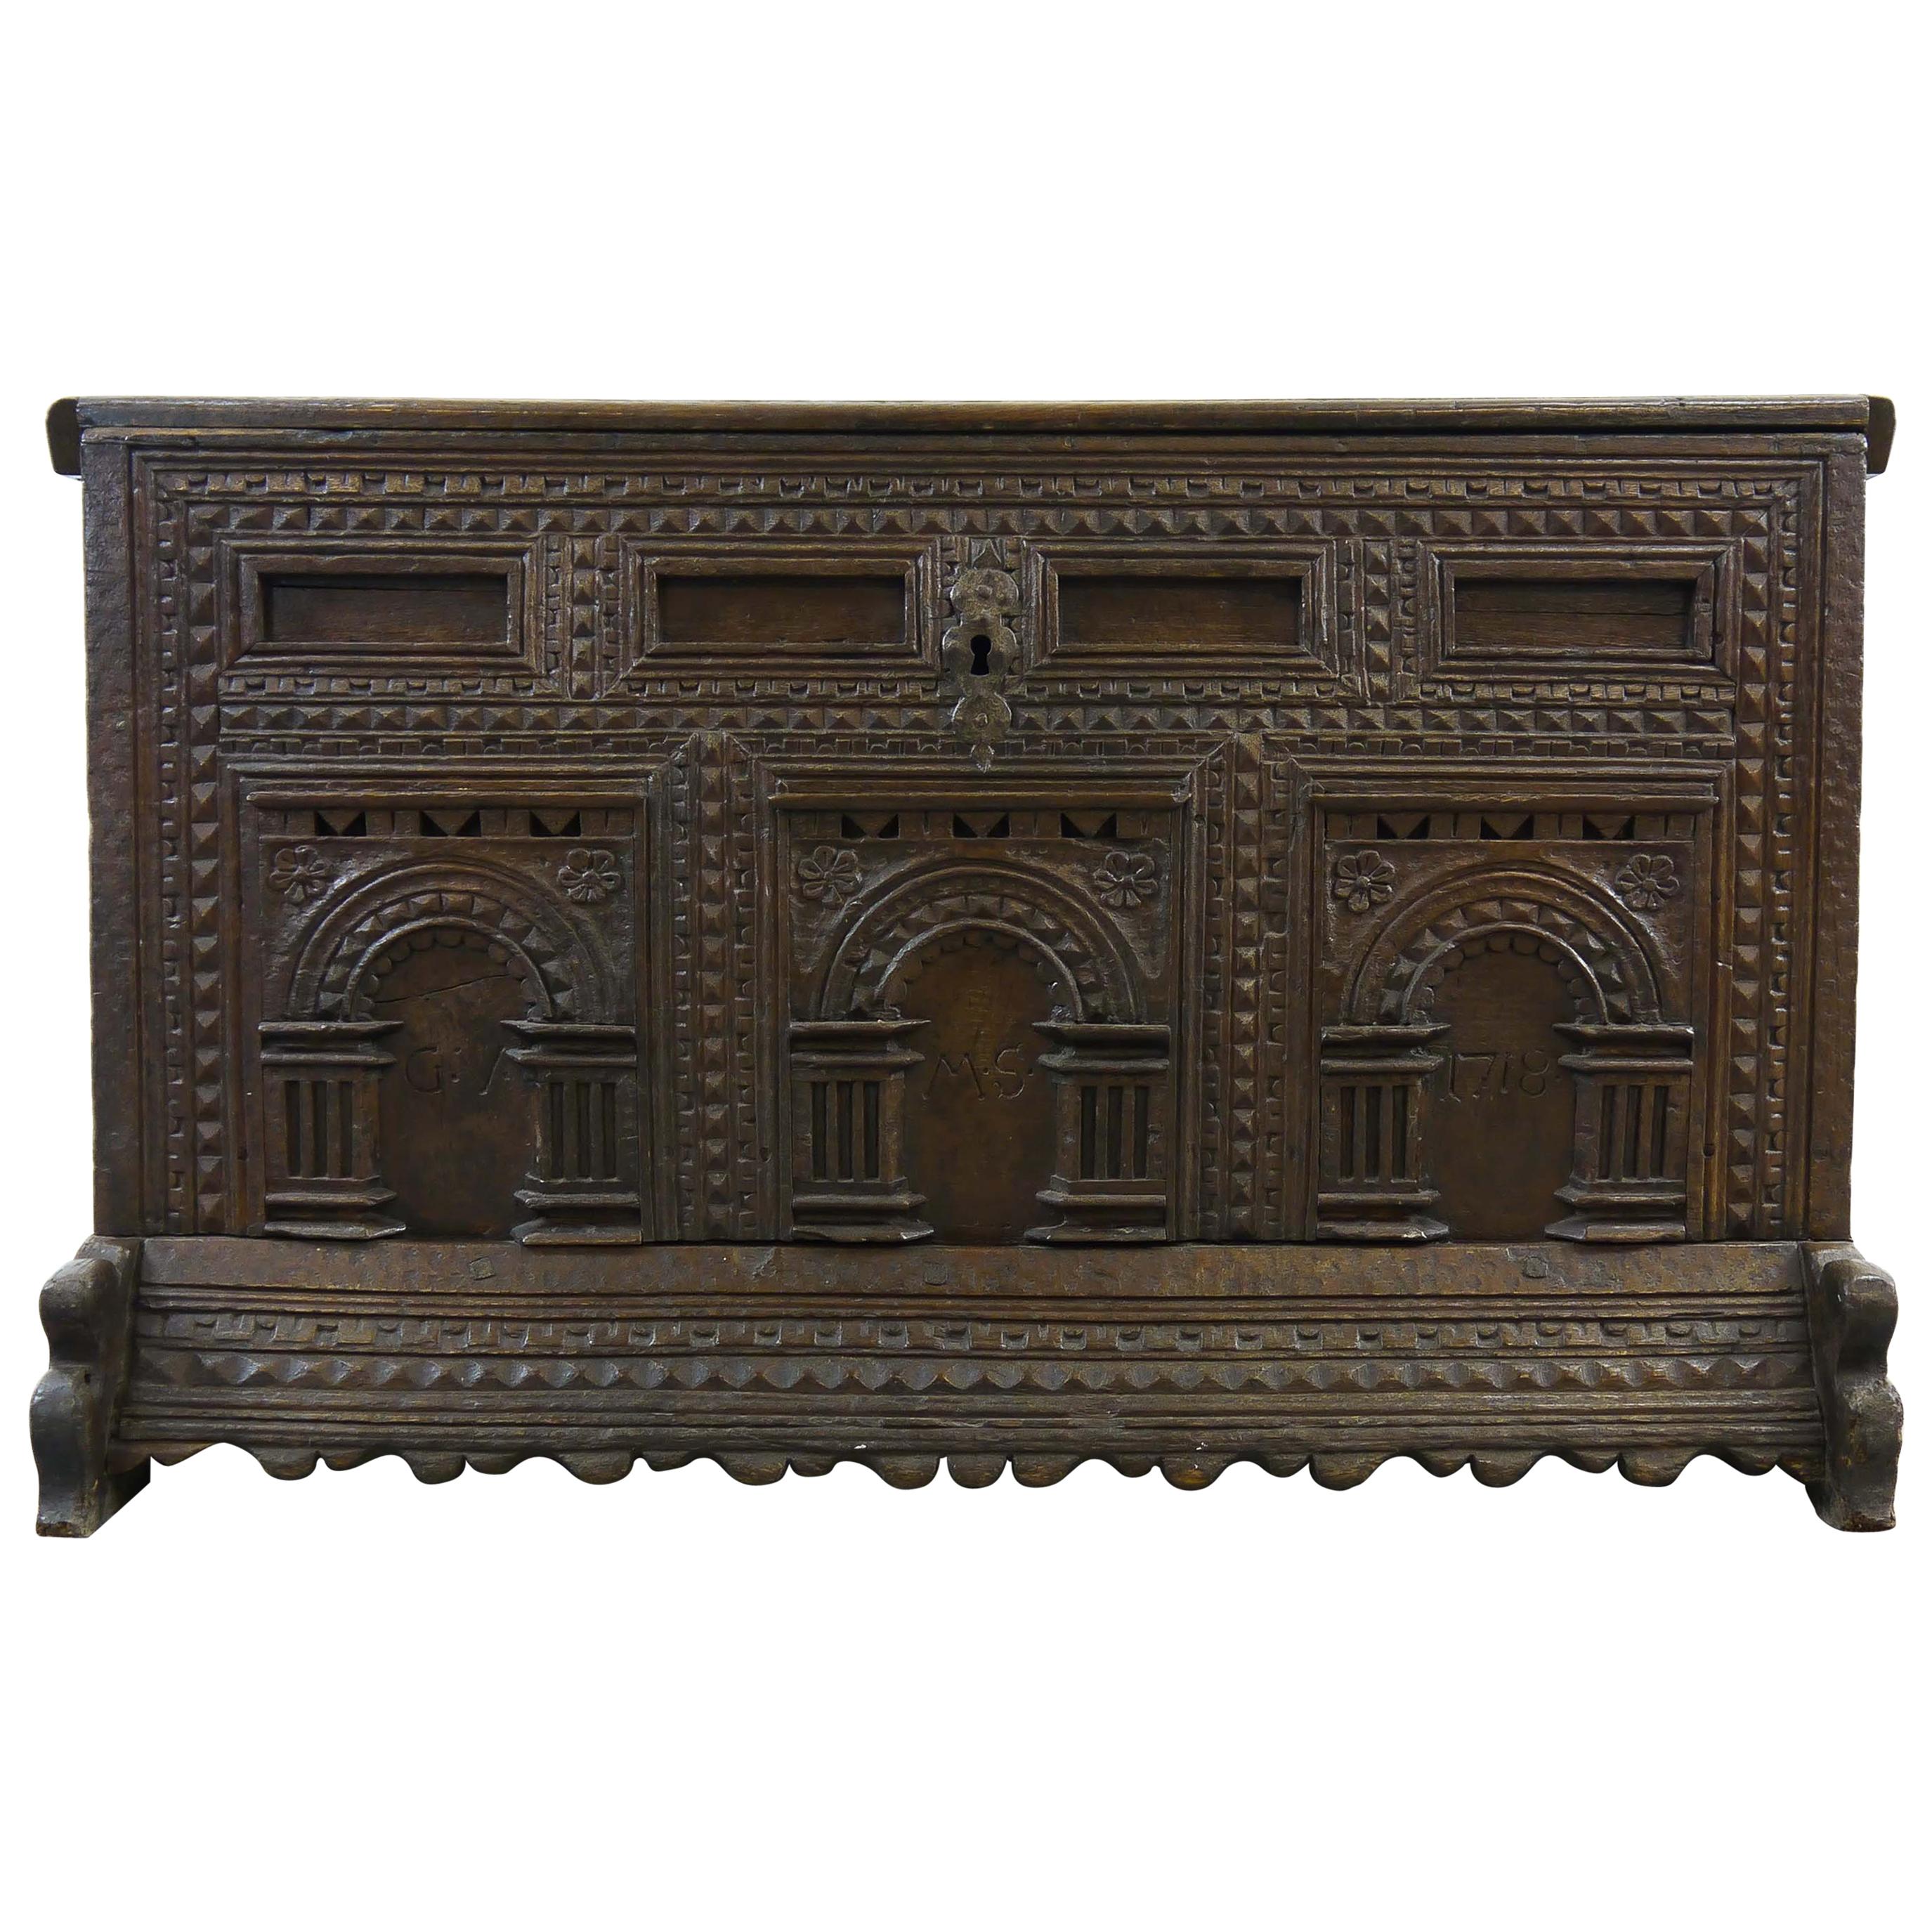 German Hope Chest or Dowry Chest, Carved Oak, Dated 1718, Baroque